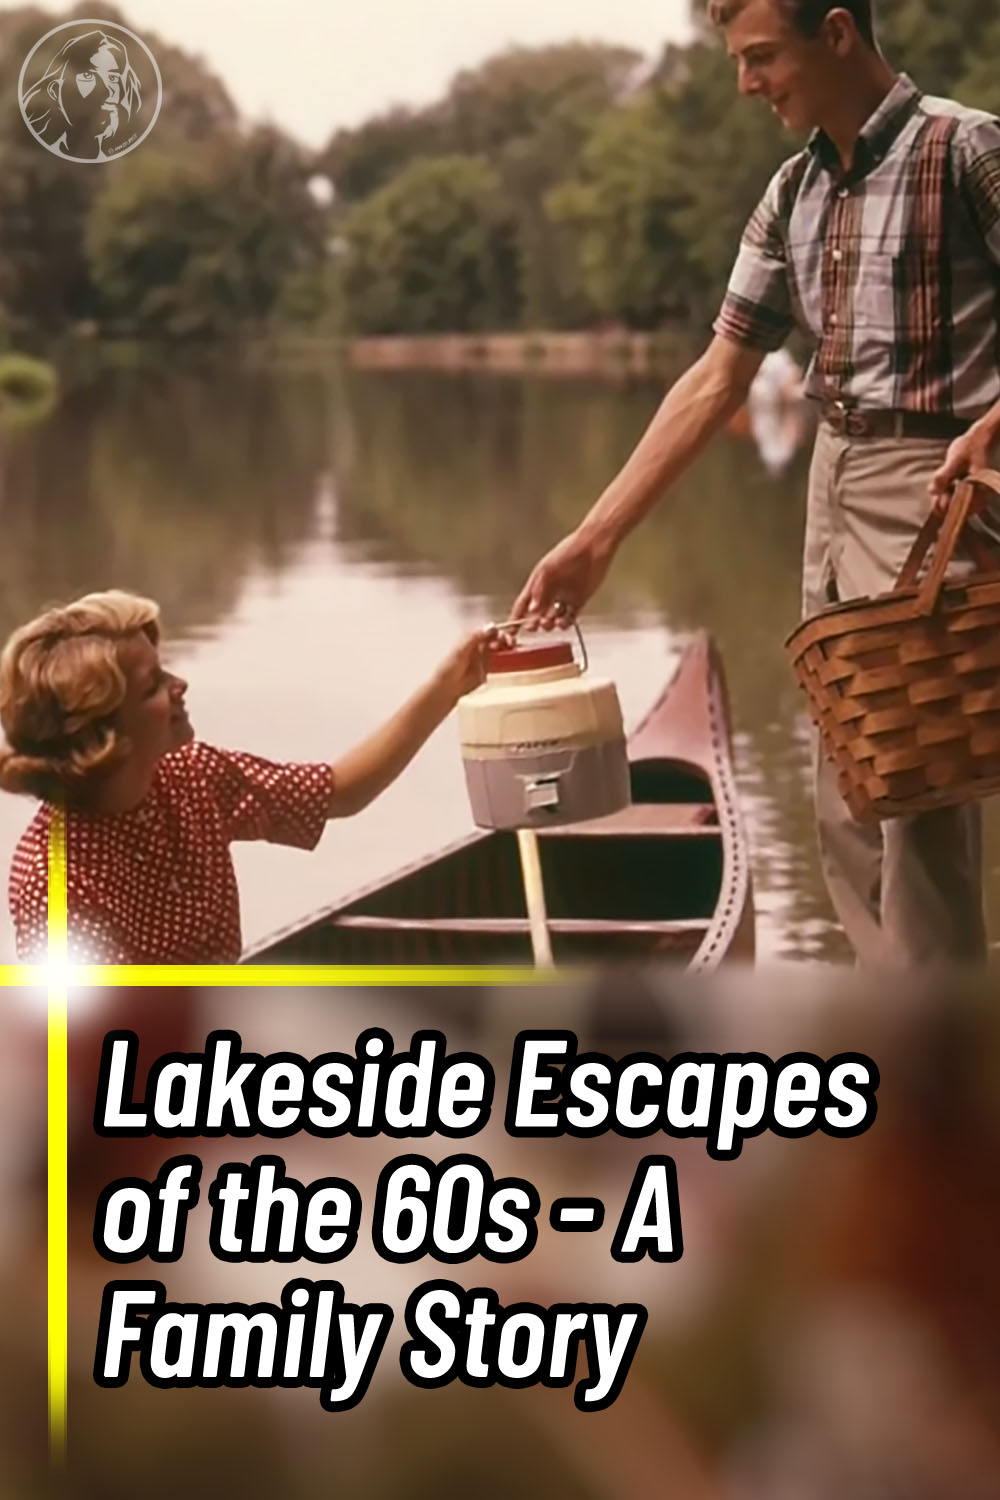 Lakeside Escapes of the 60s - A Family Story